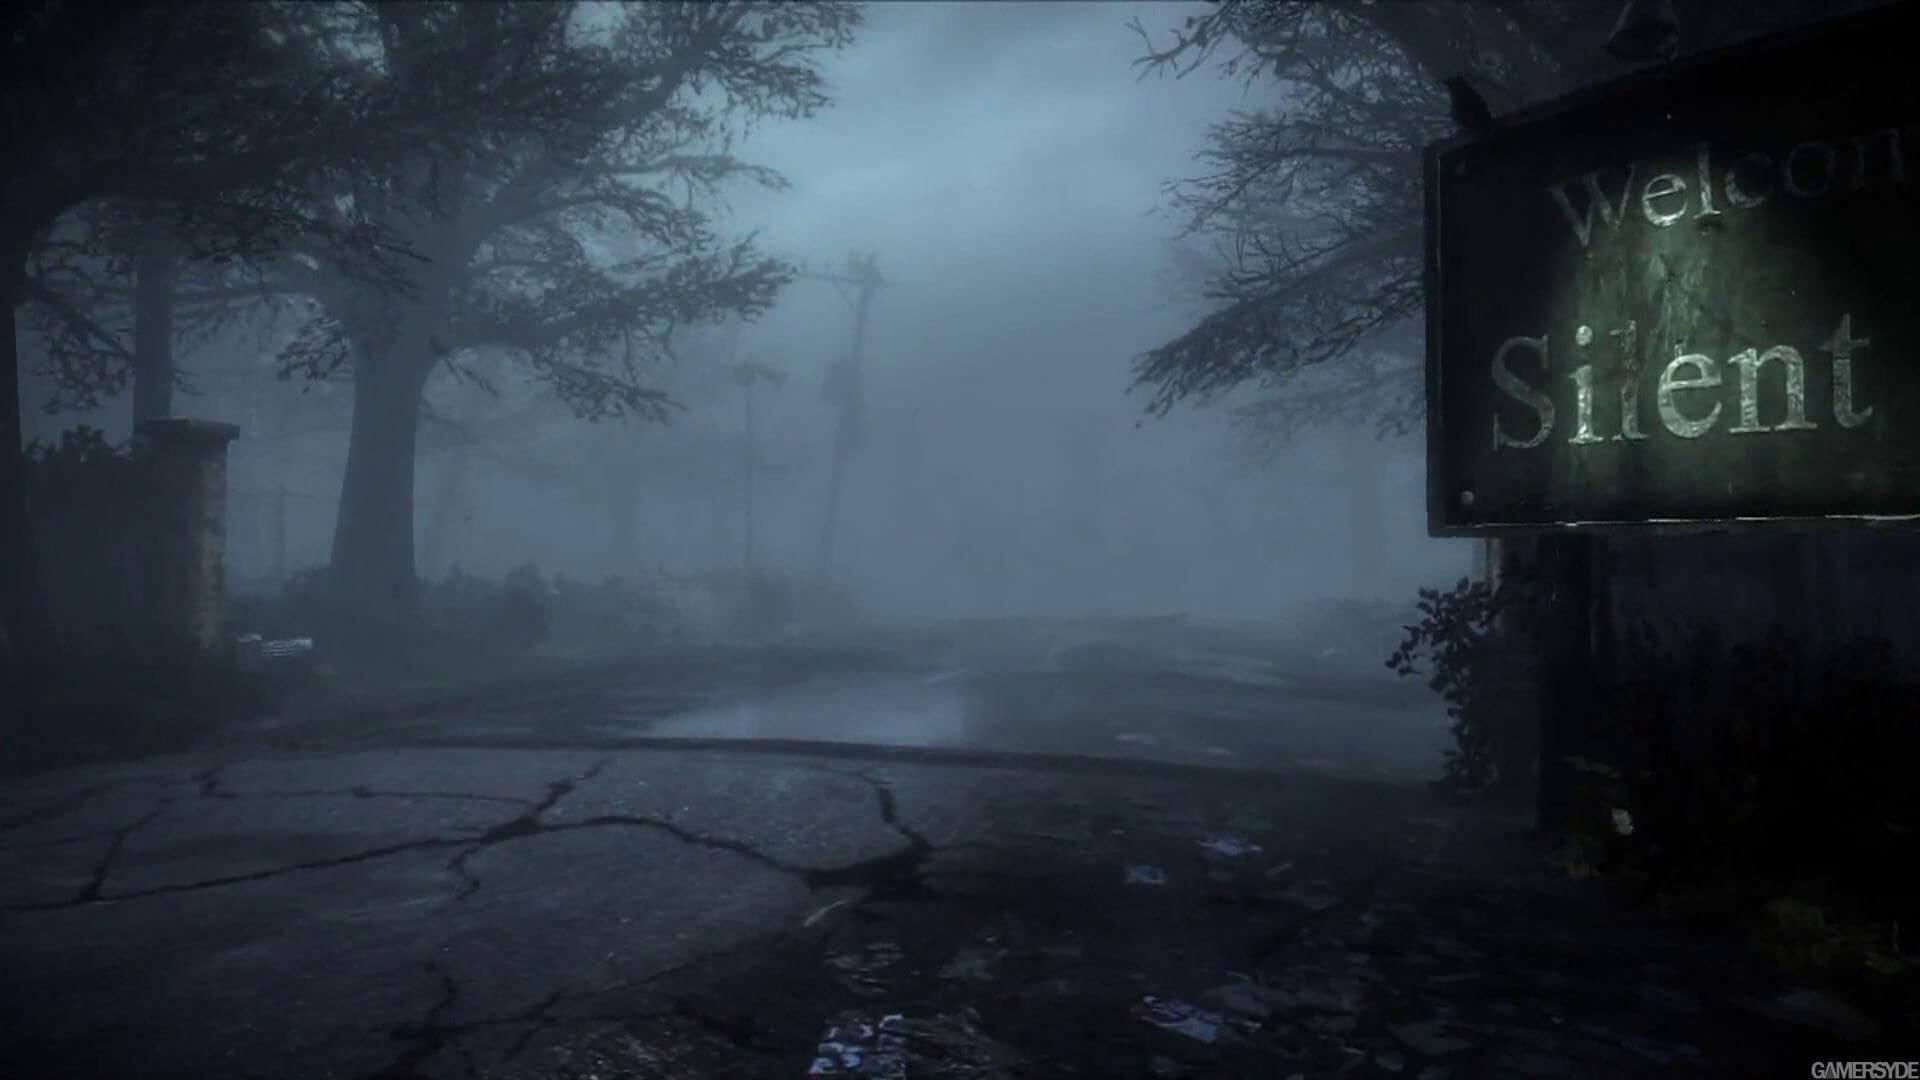 Silent Hill October 19th Transmission: Is announcement about new Silent Hill game 2022?